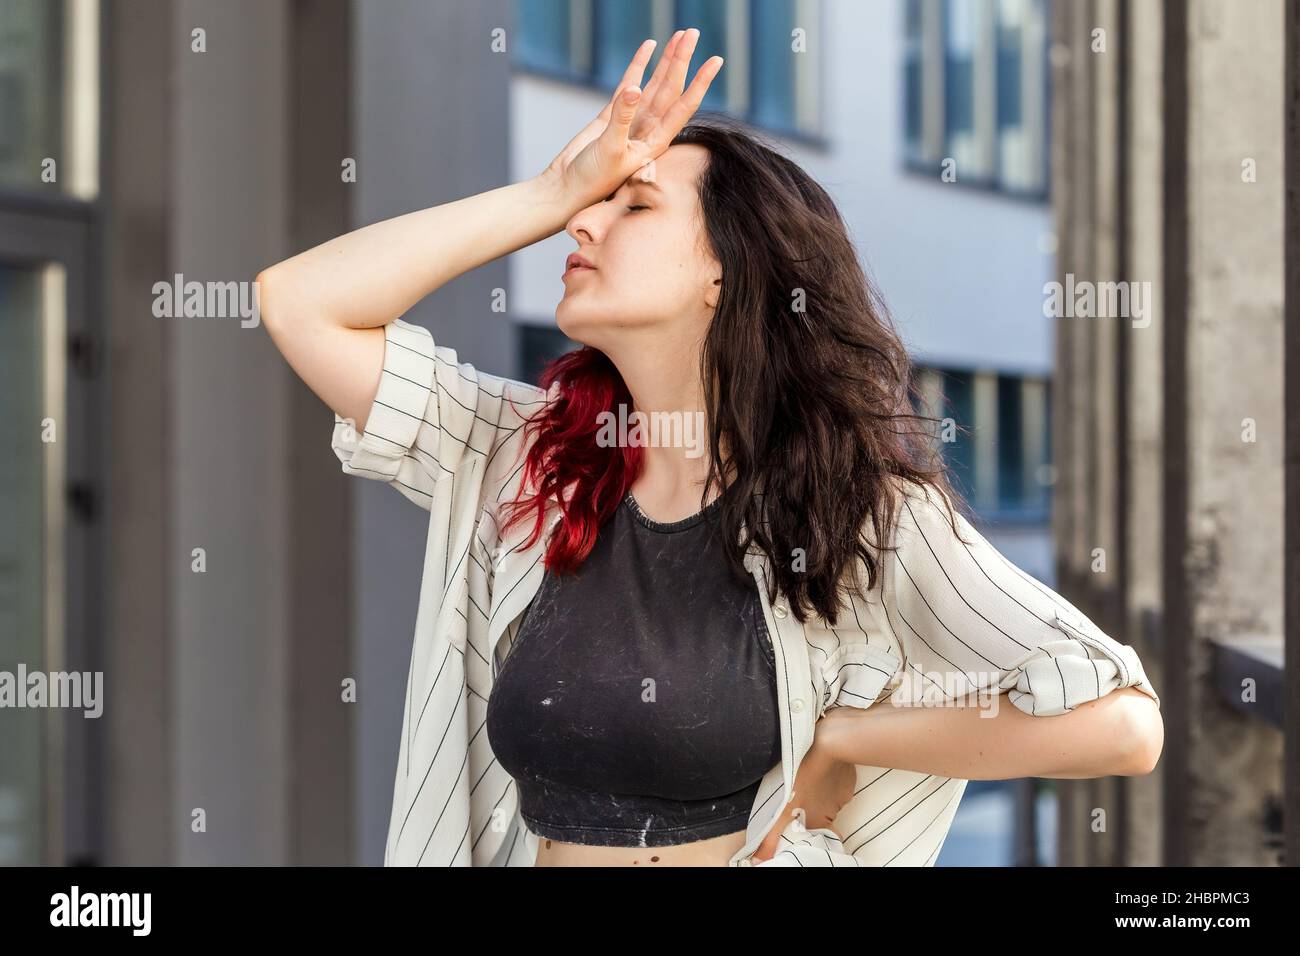 Waist-up shot of white european woman, who is holding arm on forehead showing despair, over office building background. Negative emotion concept. Pers Stock Photo